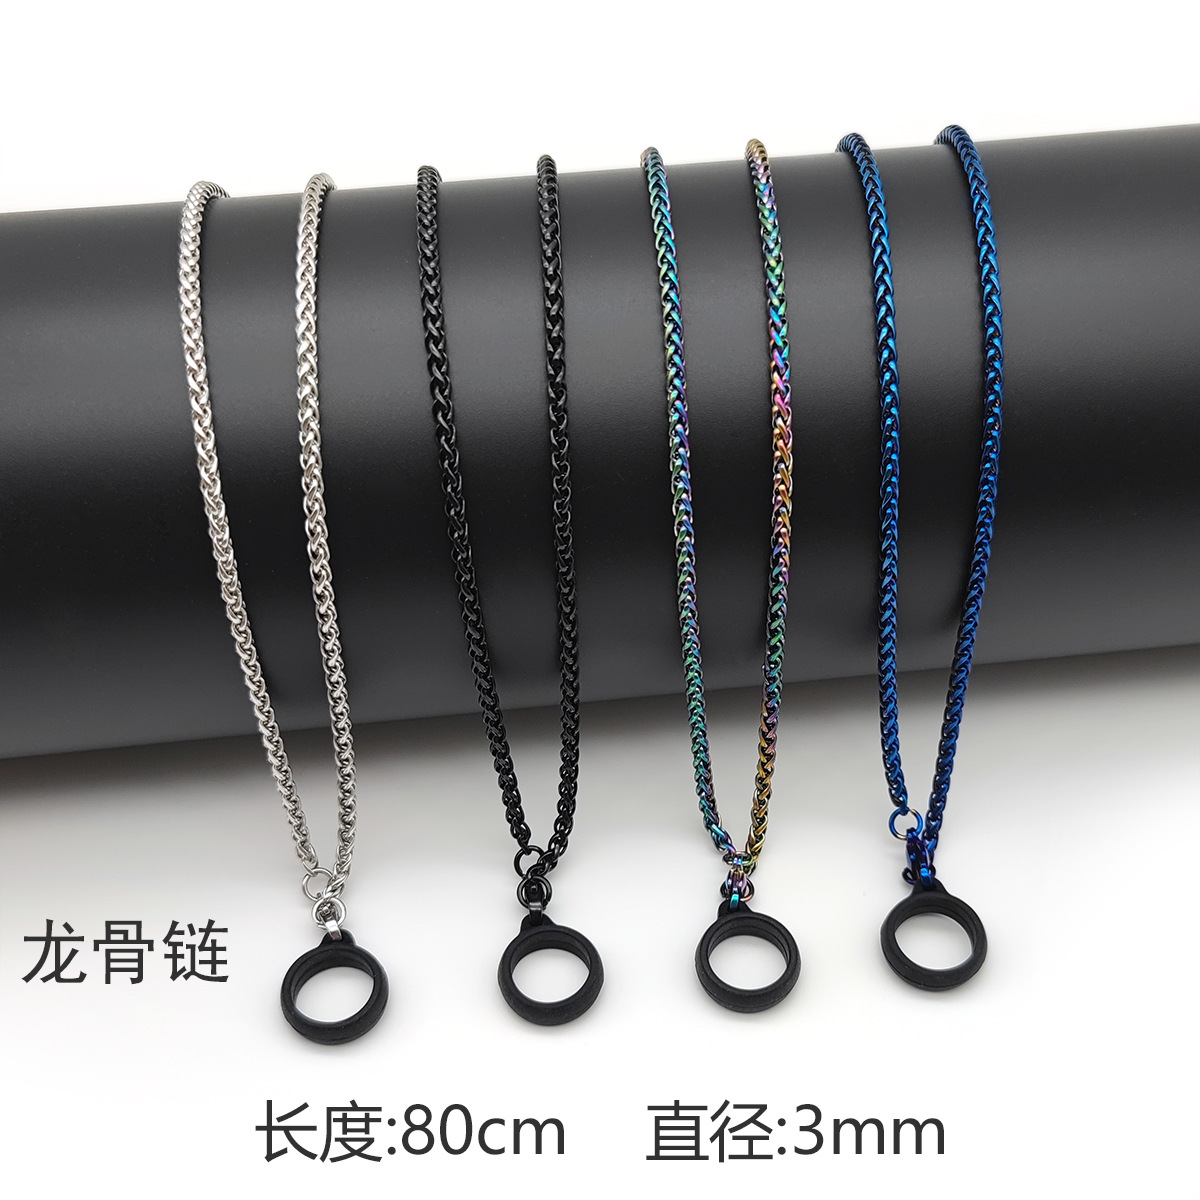 Keel Chain Relax Yue Ke Grapefruit Modi NK Chain Stainless Steel Lanyard Square Pearl Necklace with Ring Does Not Fade